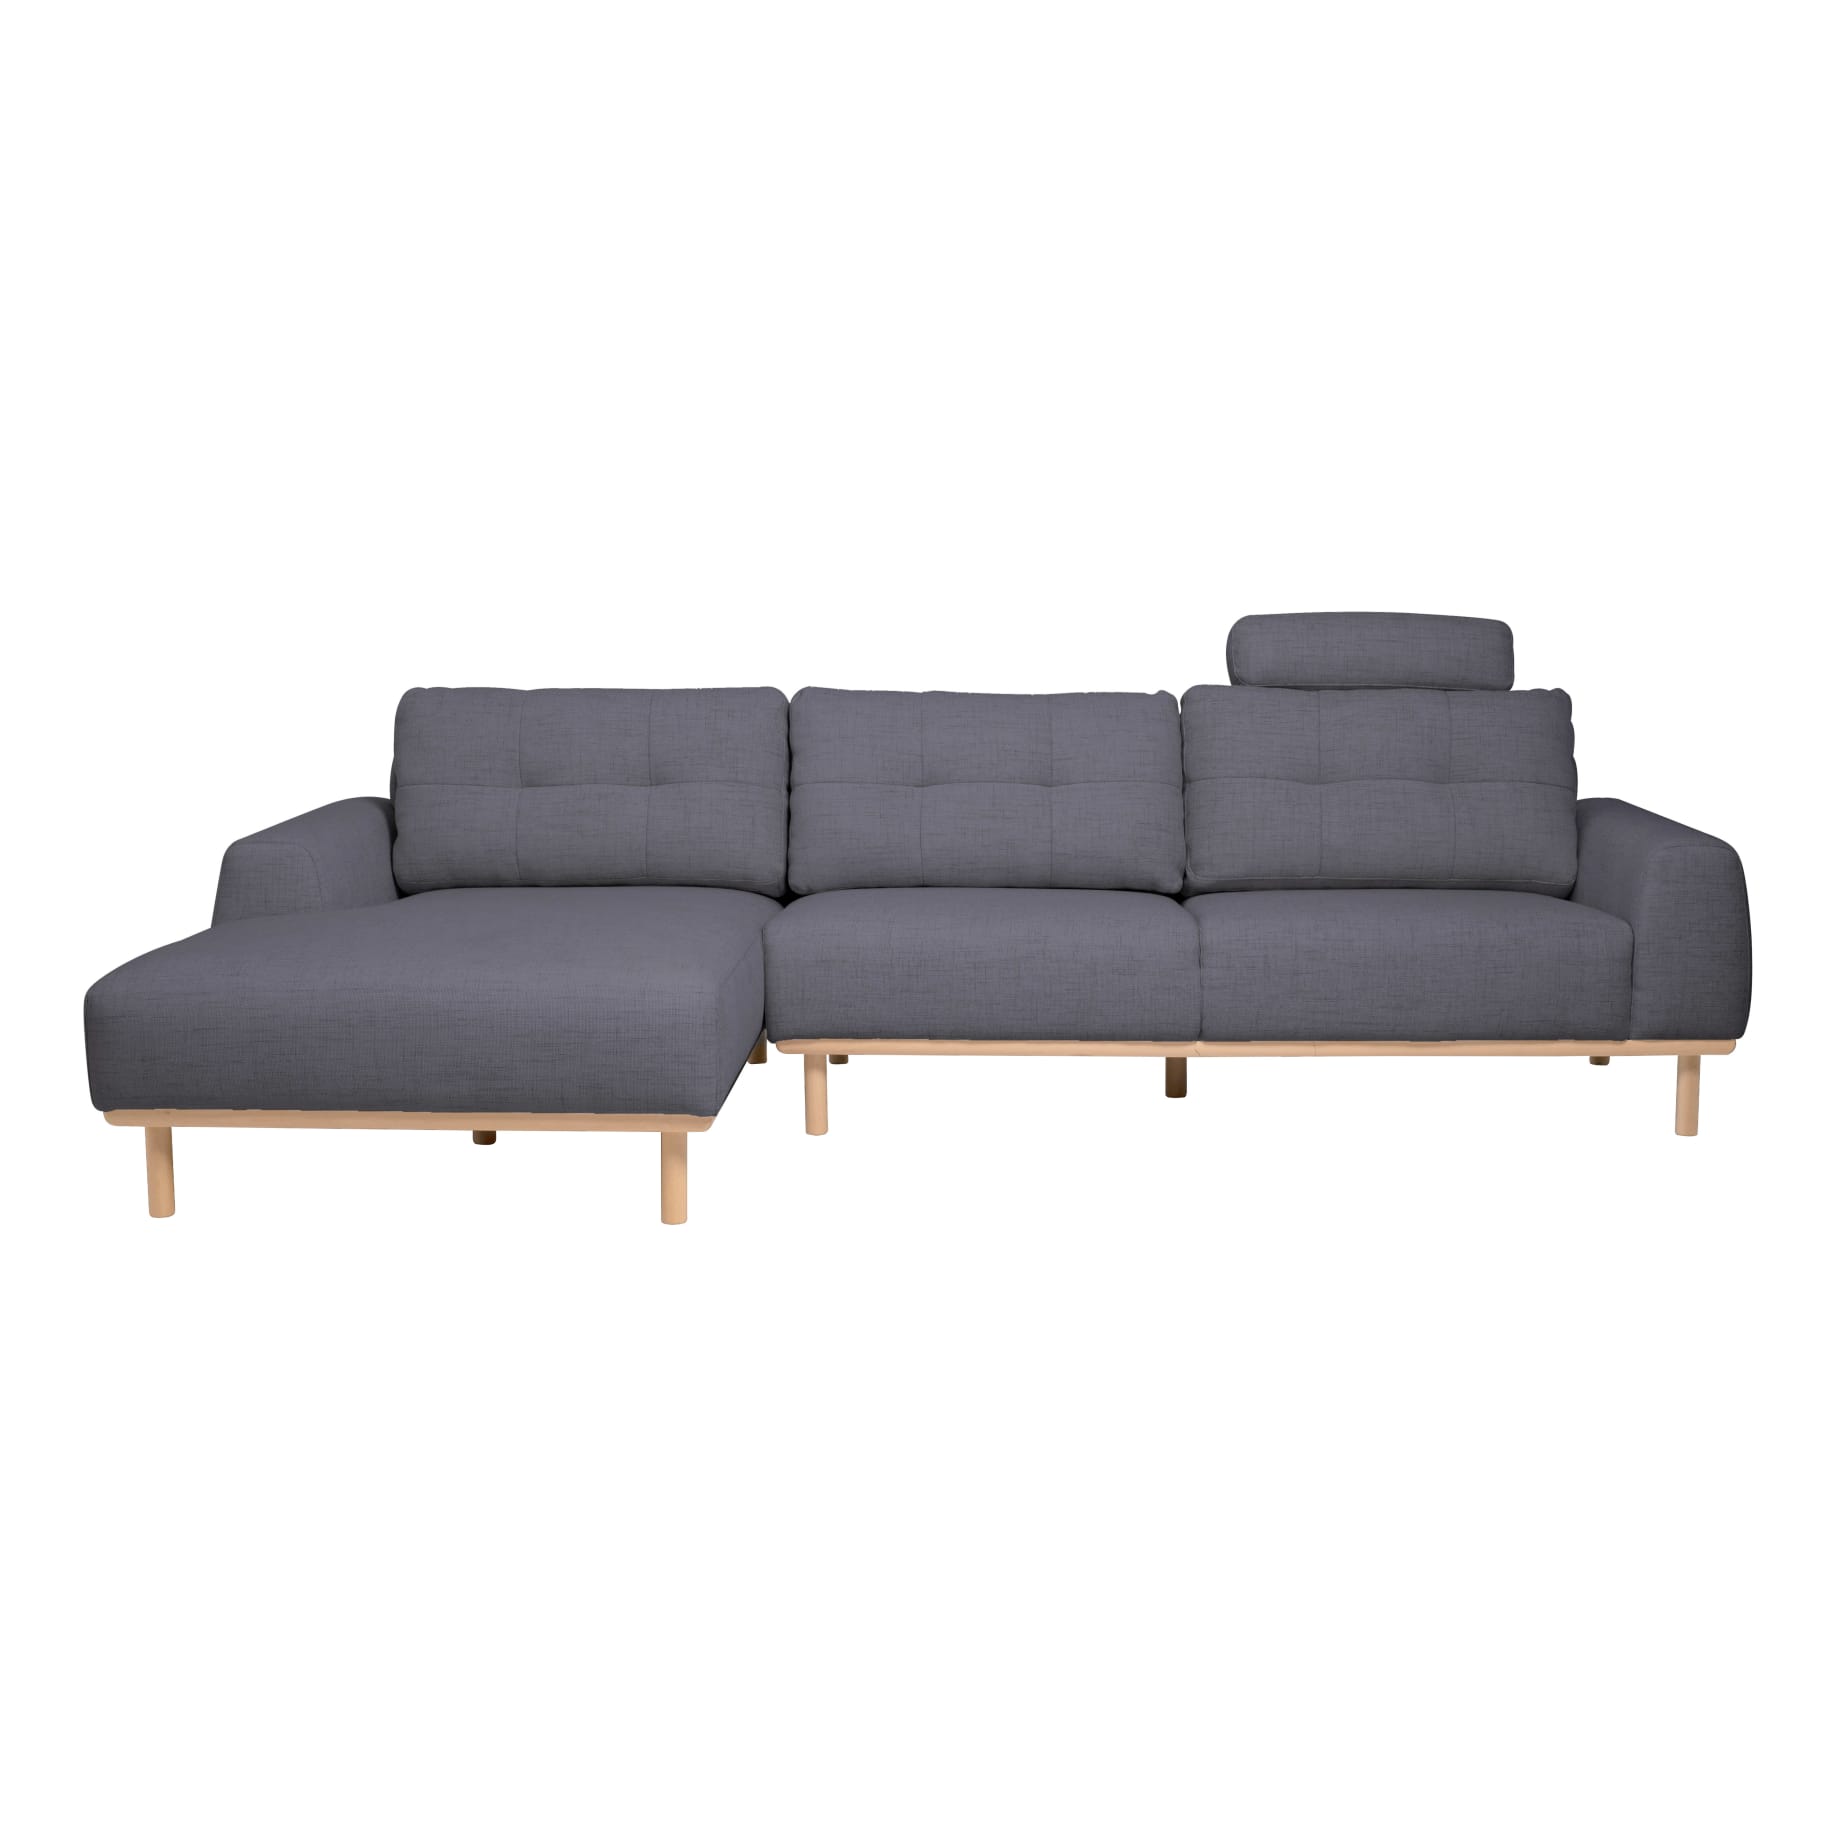 Stratton 3 Seater Sofa + Chaise LHF in Cloud Storm